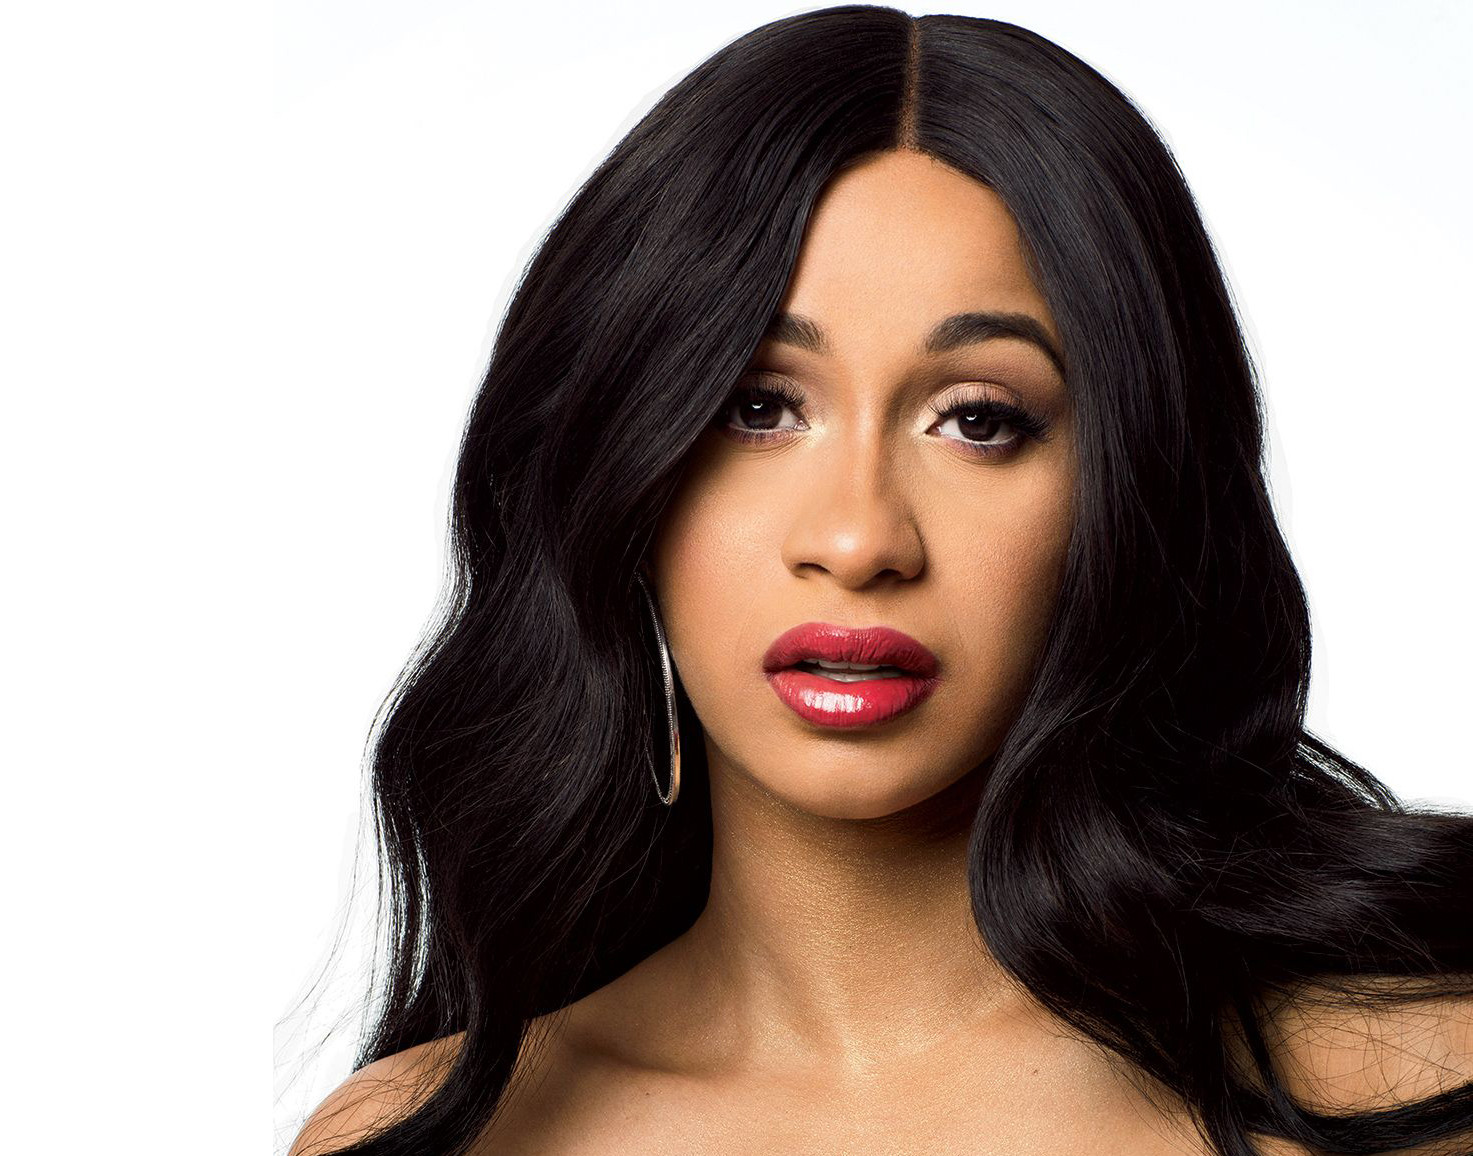 Cardi B Fed Up With Fake Stories About Her: “It’s Not Going To Work Im To Blessed” 28